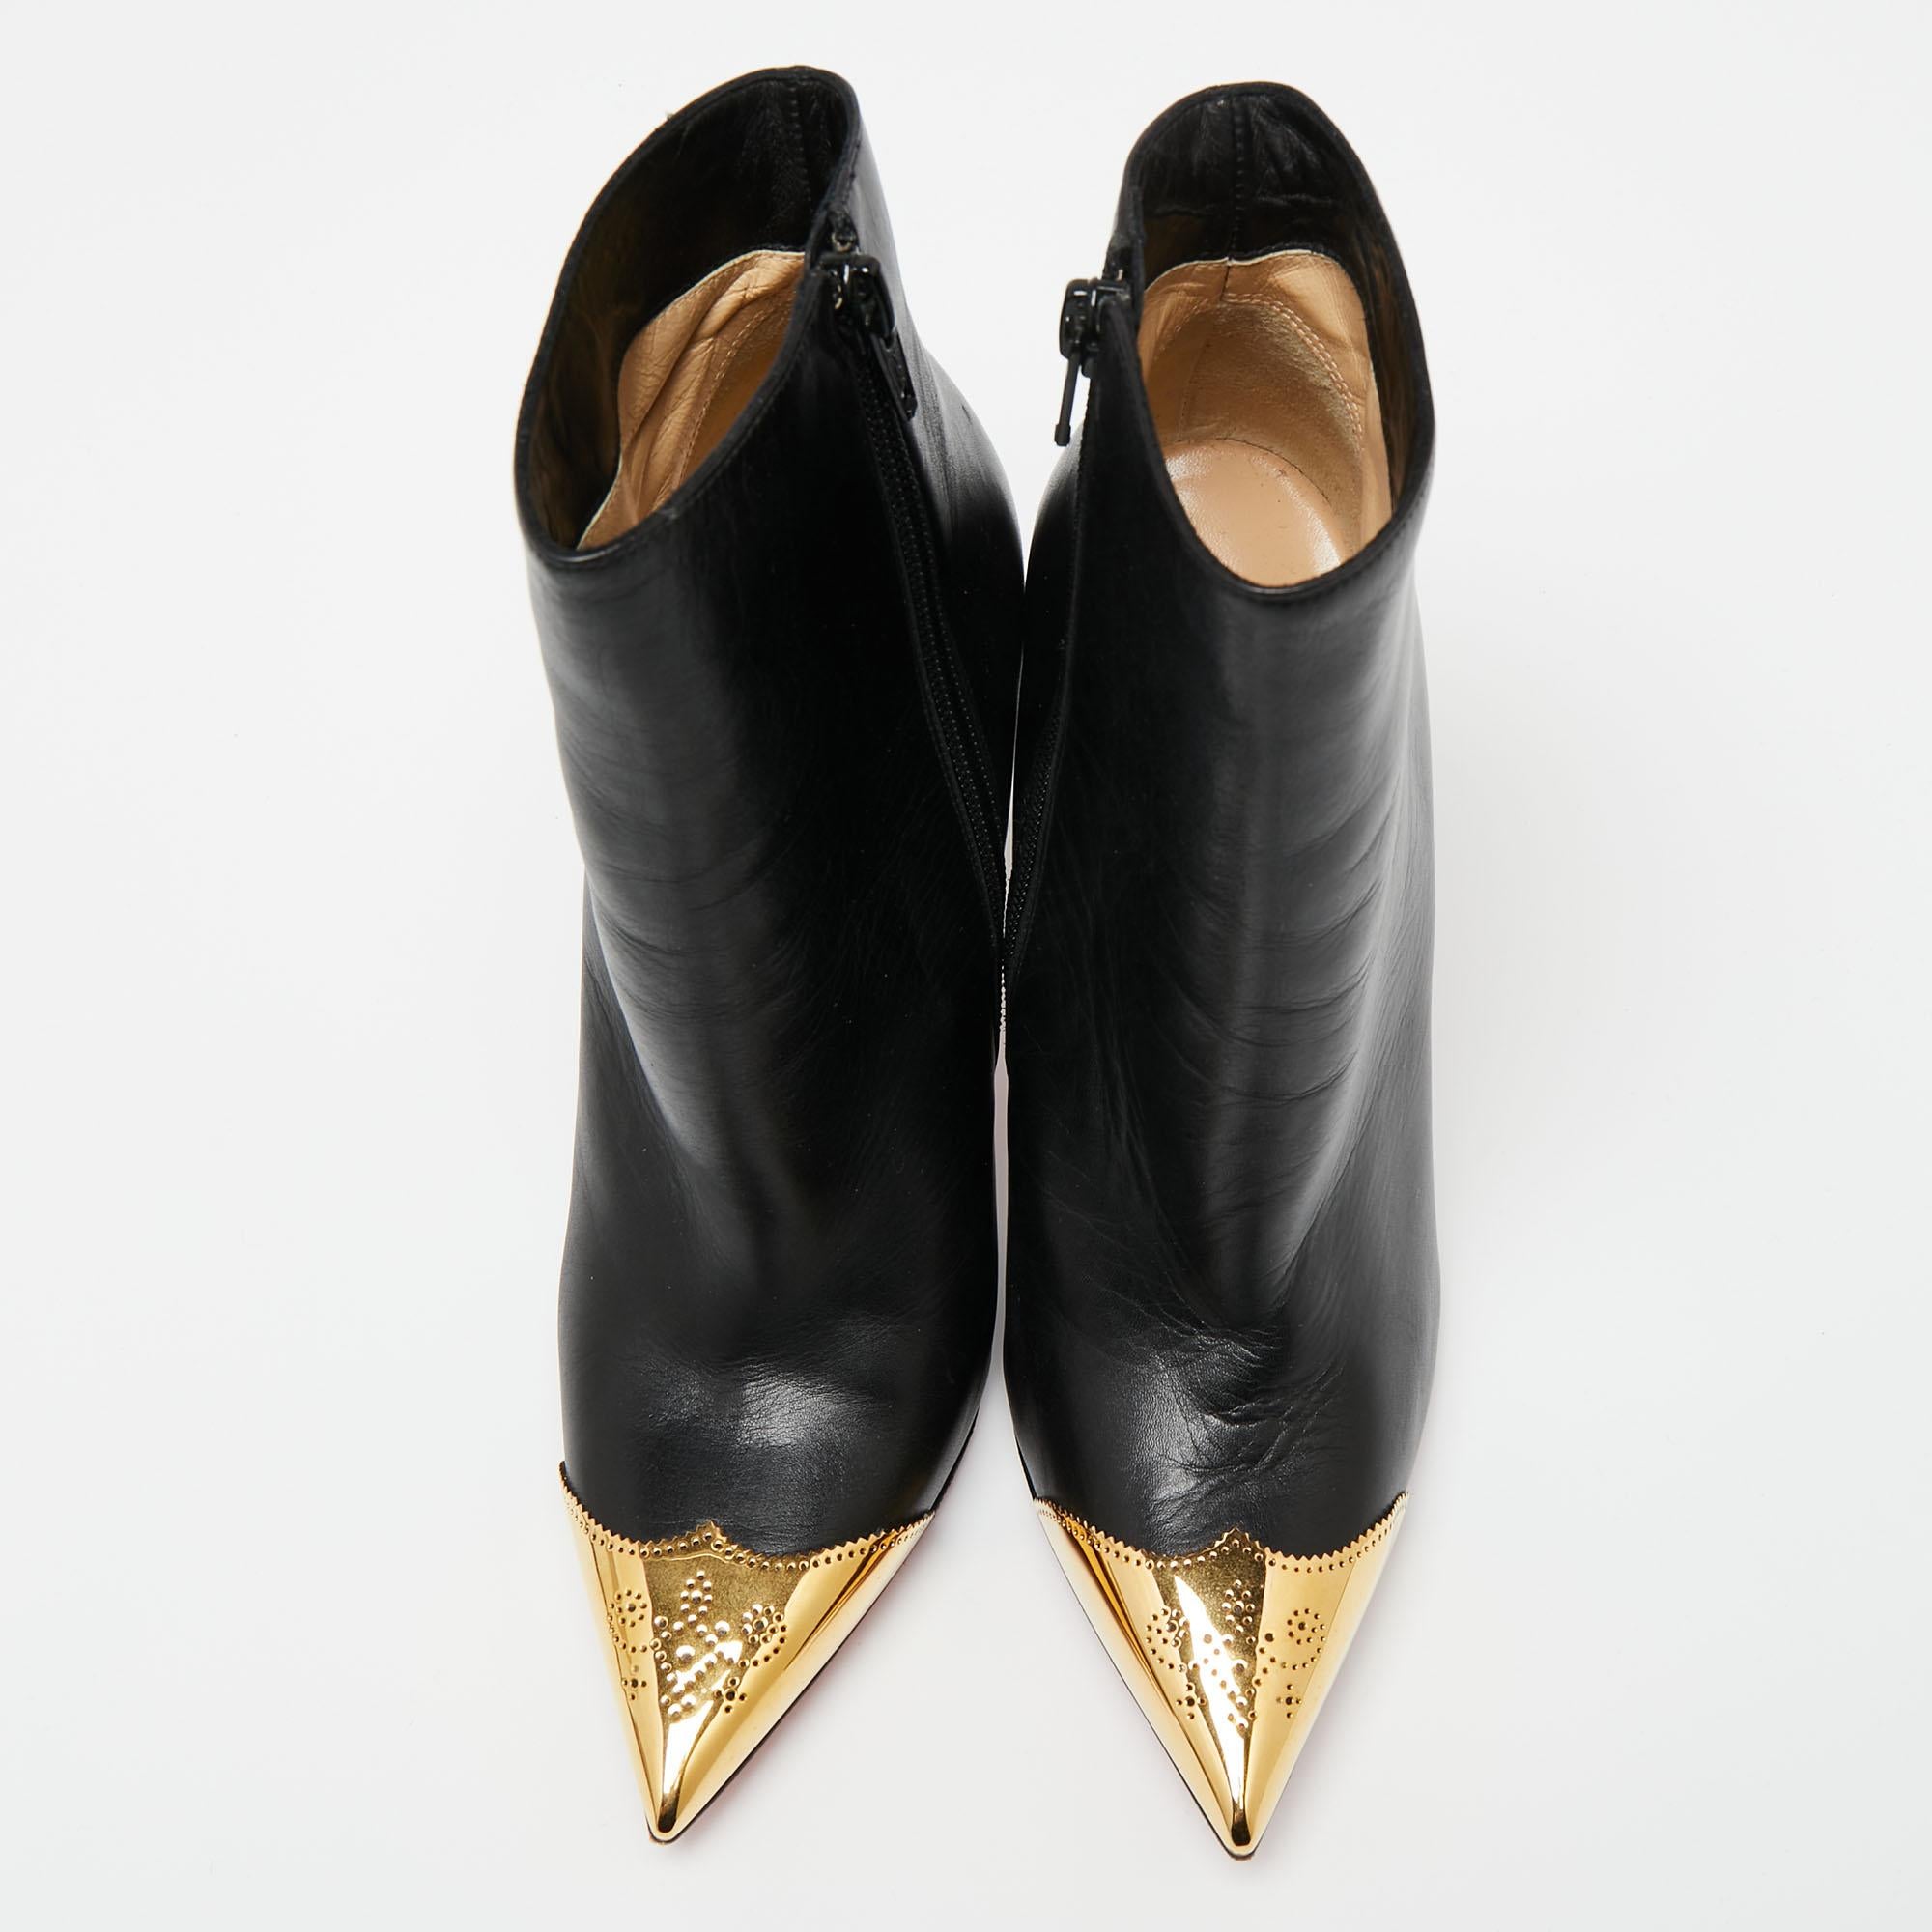 Take every step with panache in these Calamijane booties from Christian Louboutin. They are styled using black leather, with gold-tone detailed toes elevating their beauty. They feature an ankle-length shape, slim heels, and zipper closure. These